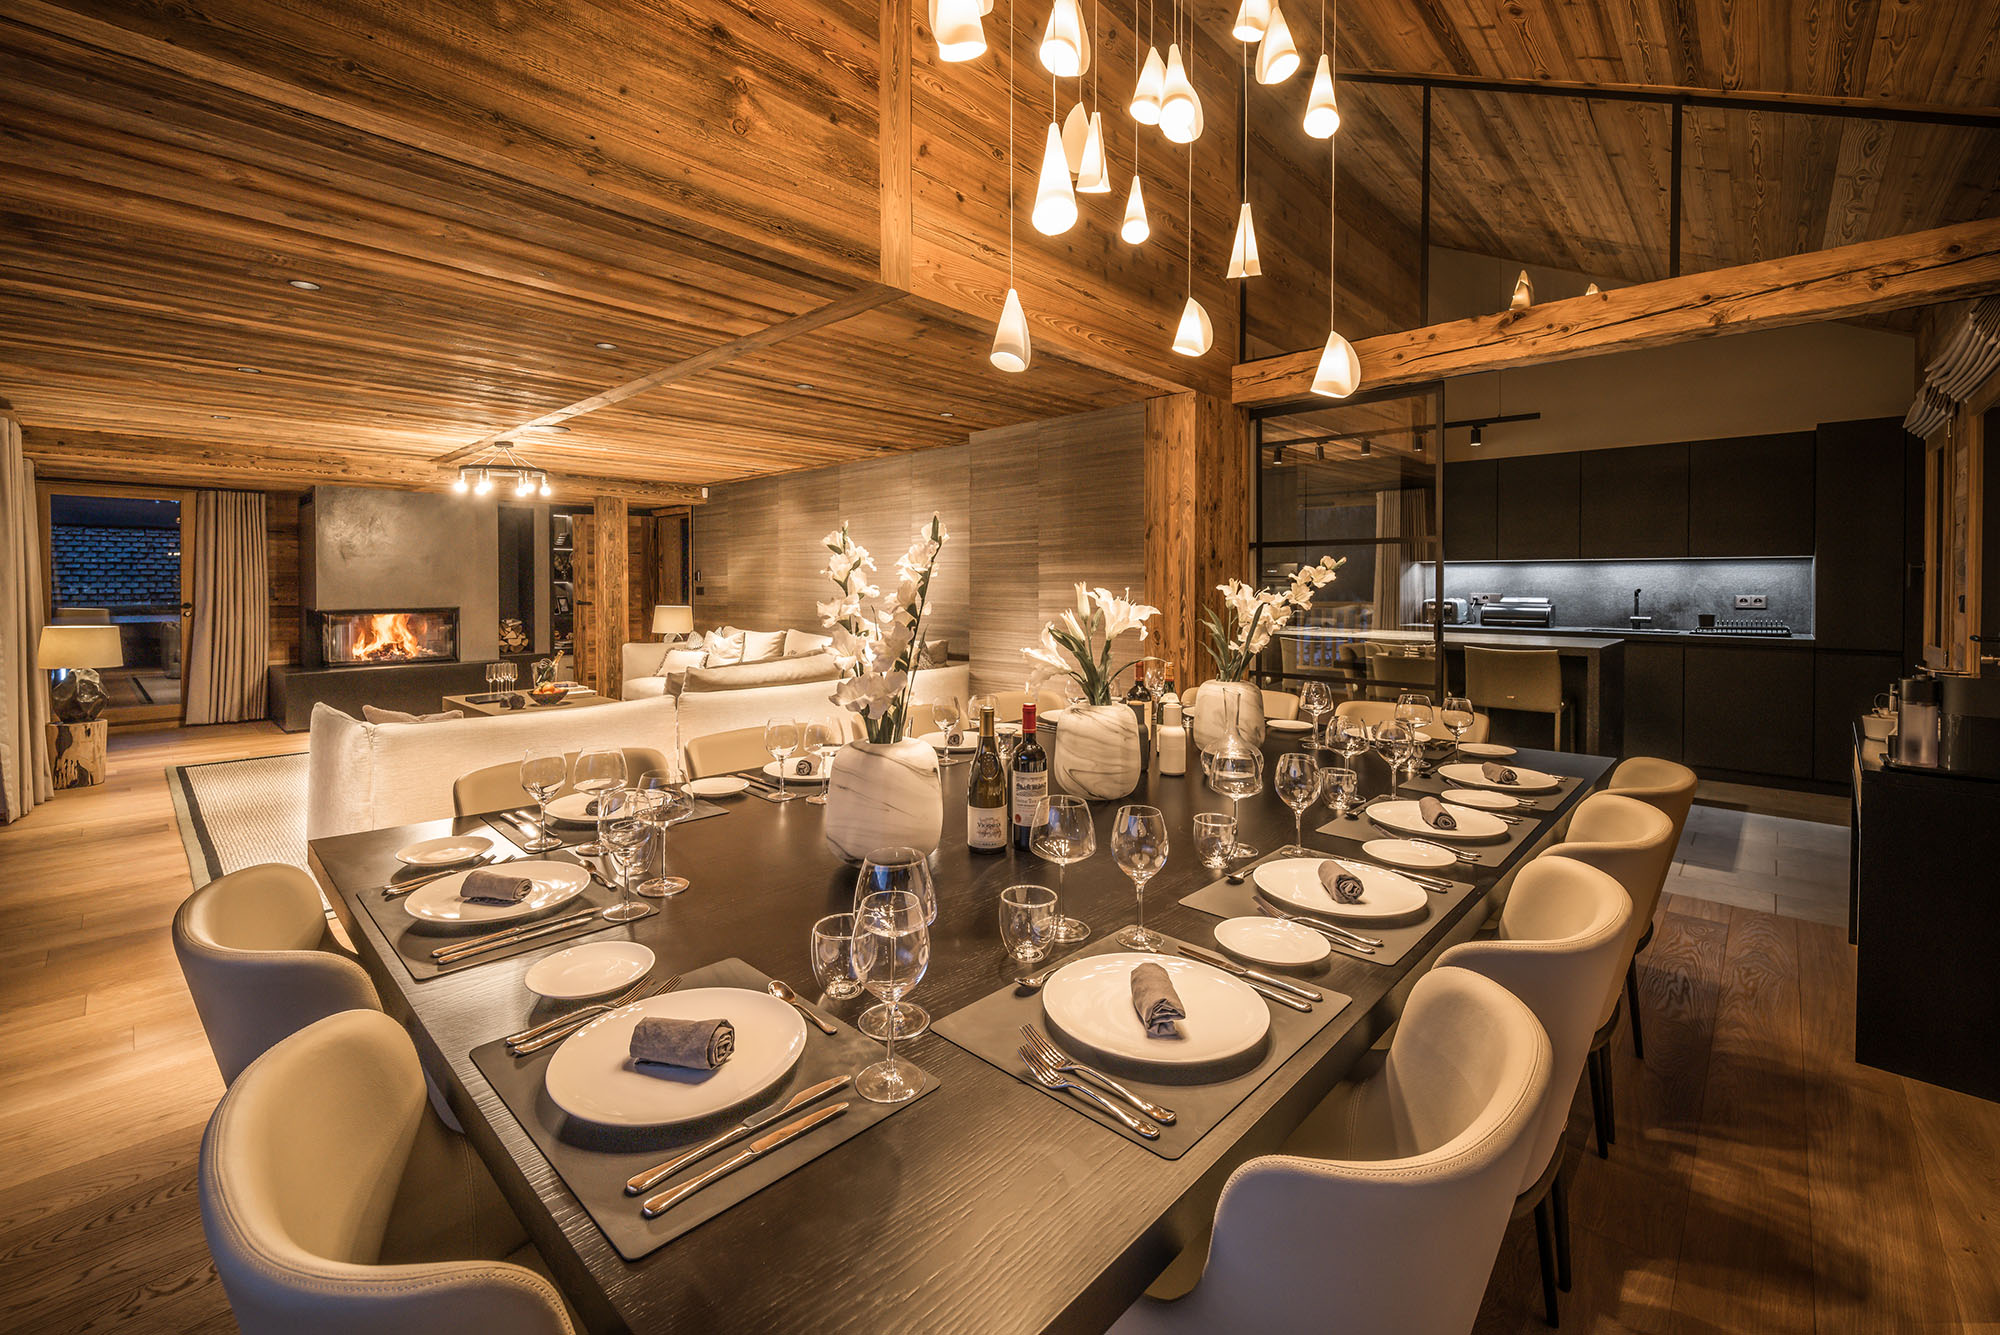 A 5 * chalet in harmony with its surroundings